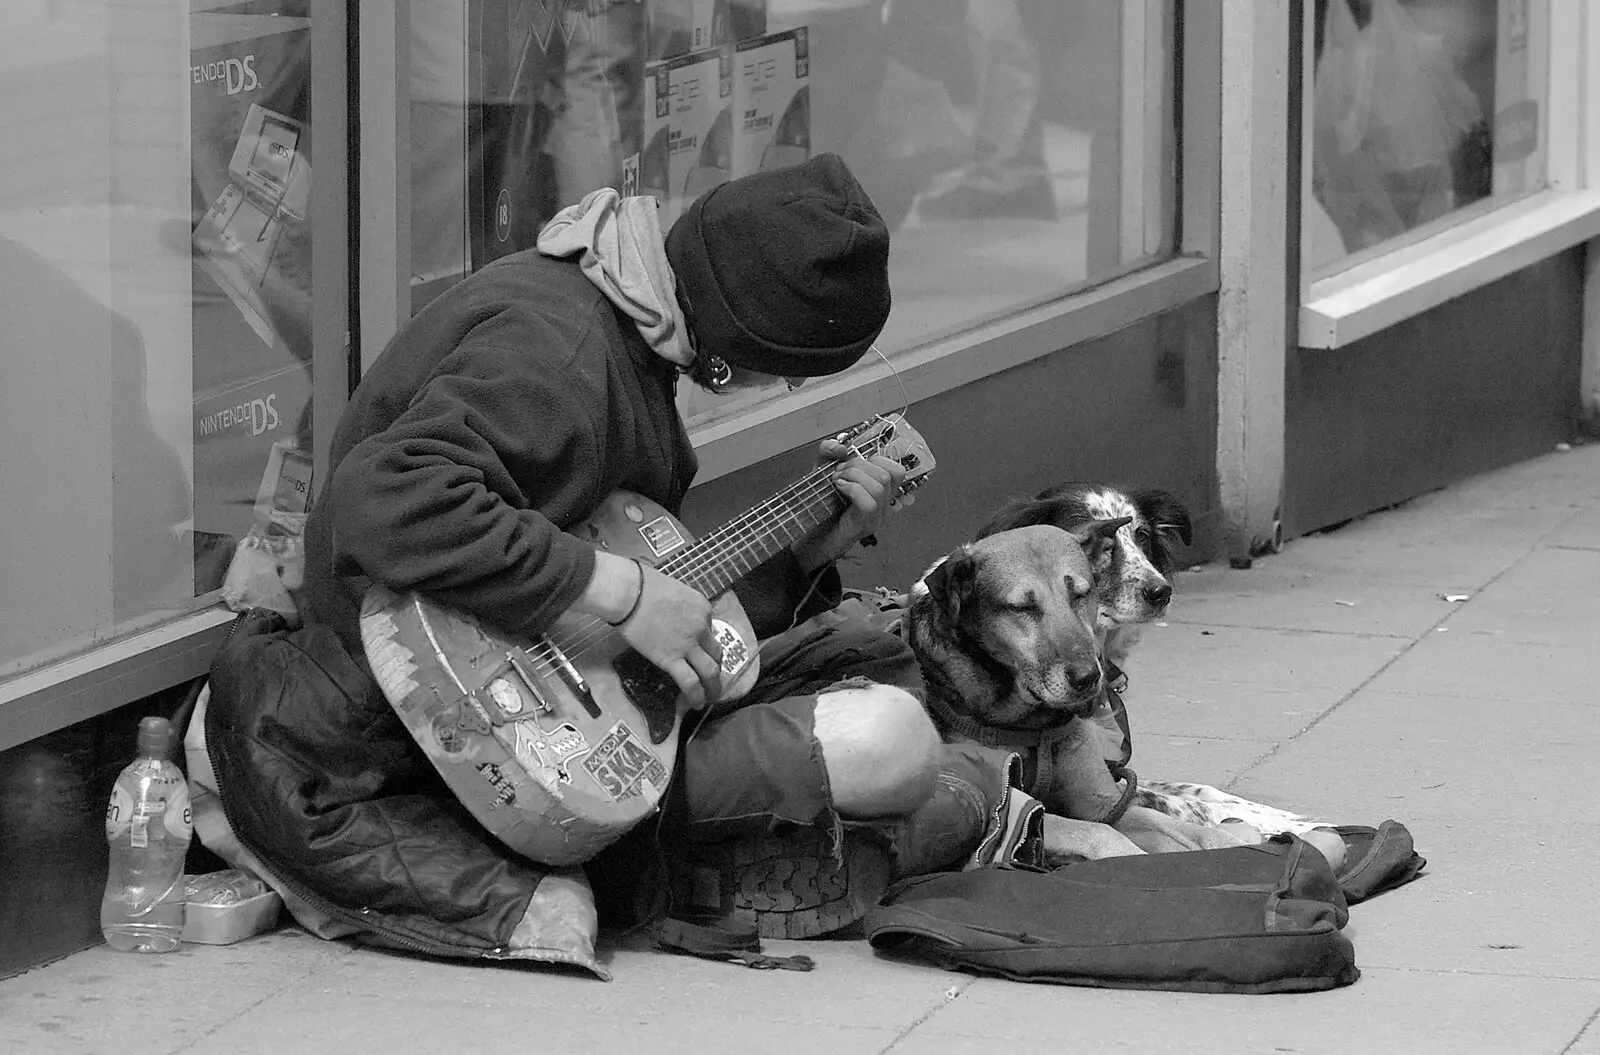 A busker and his dog, outside Castle Mall in Norwich, from Norwich Market, the BSCC at Occold, and Diss Publishing - 10th April 2005